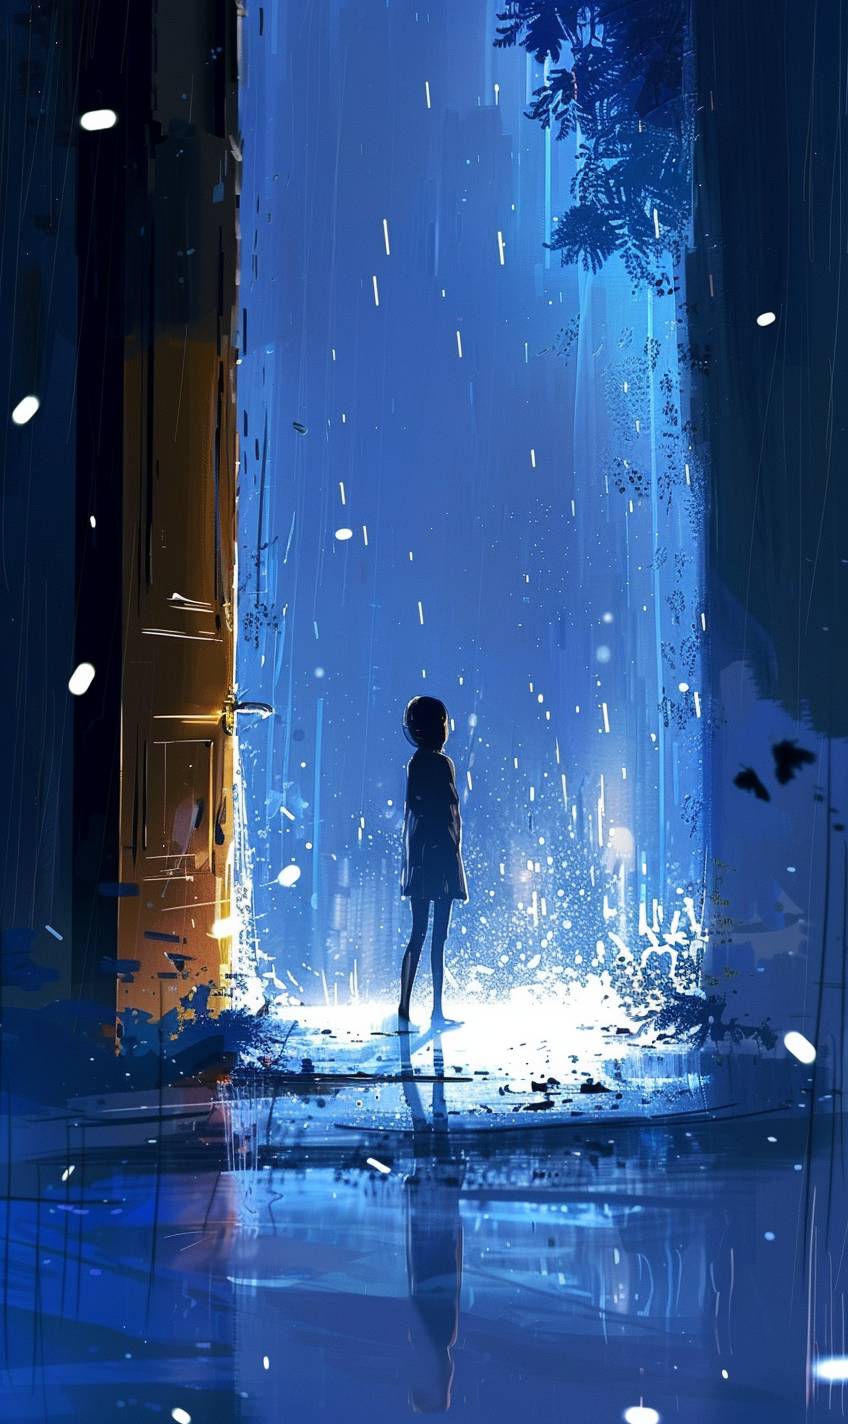 In style of Pascal Campion, Time traveler witnessing pivotal moments unfold --ar 3:5  --v 6.0